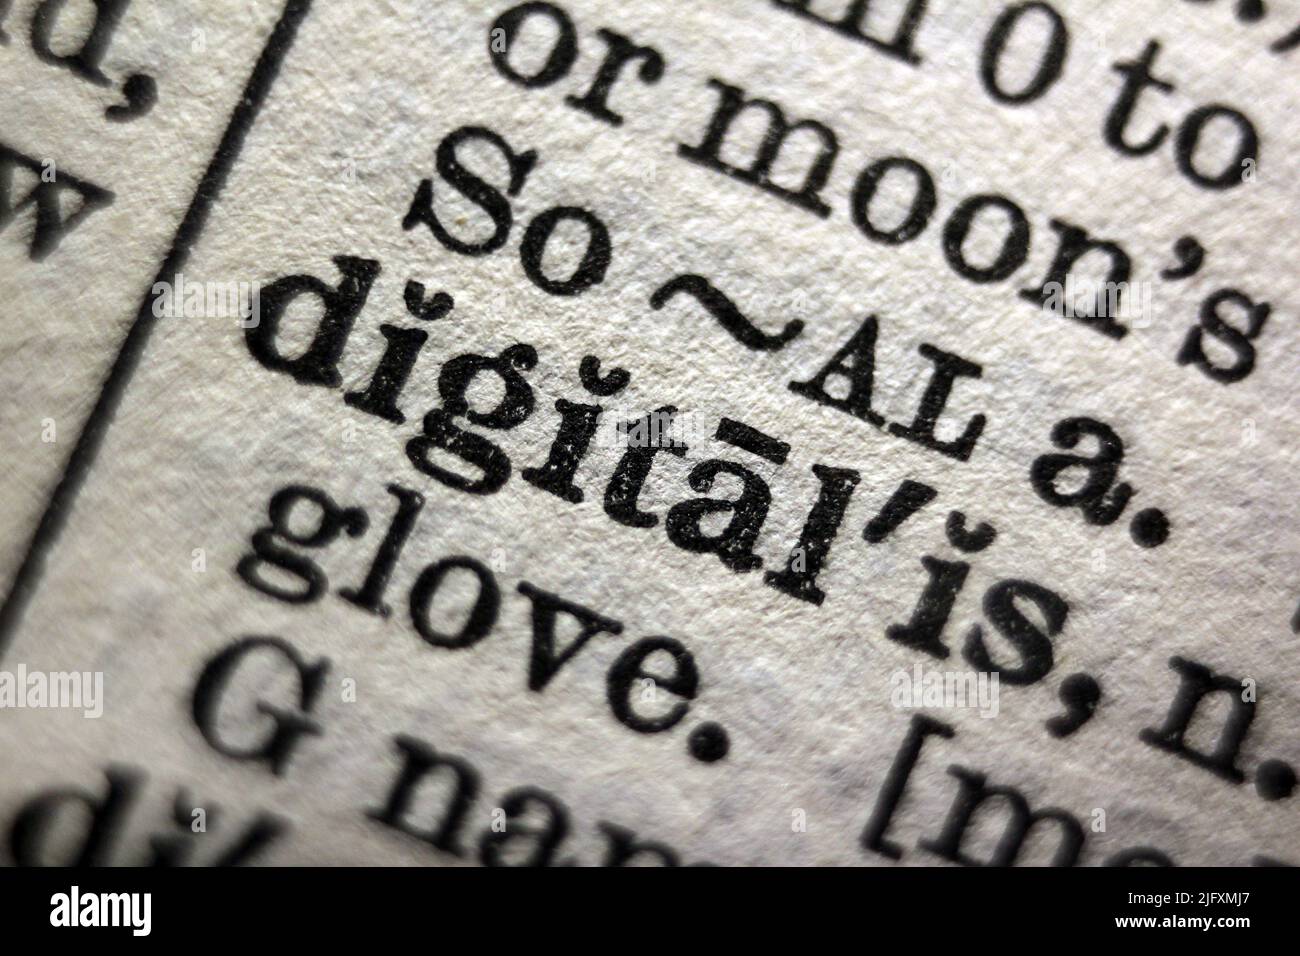 Word 'digital' printed on dictionary page, macro close-up Stock Photo